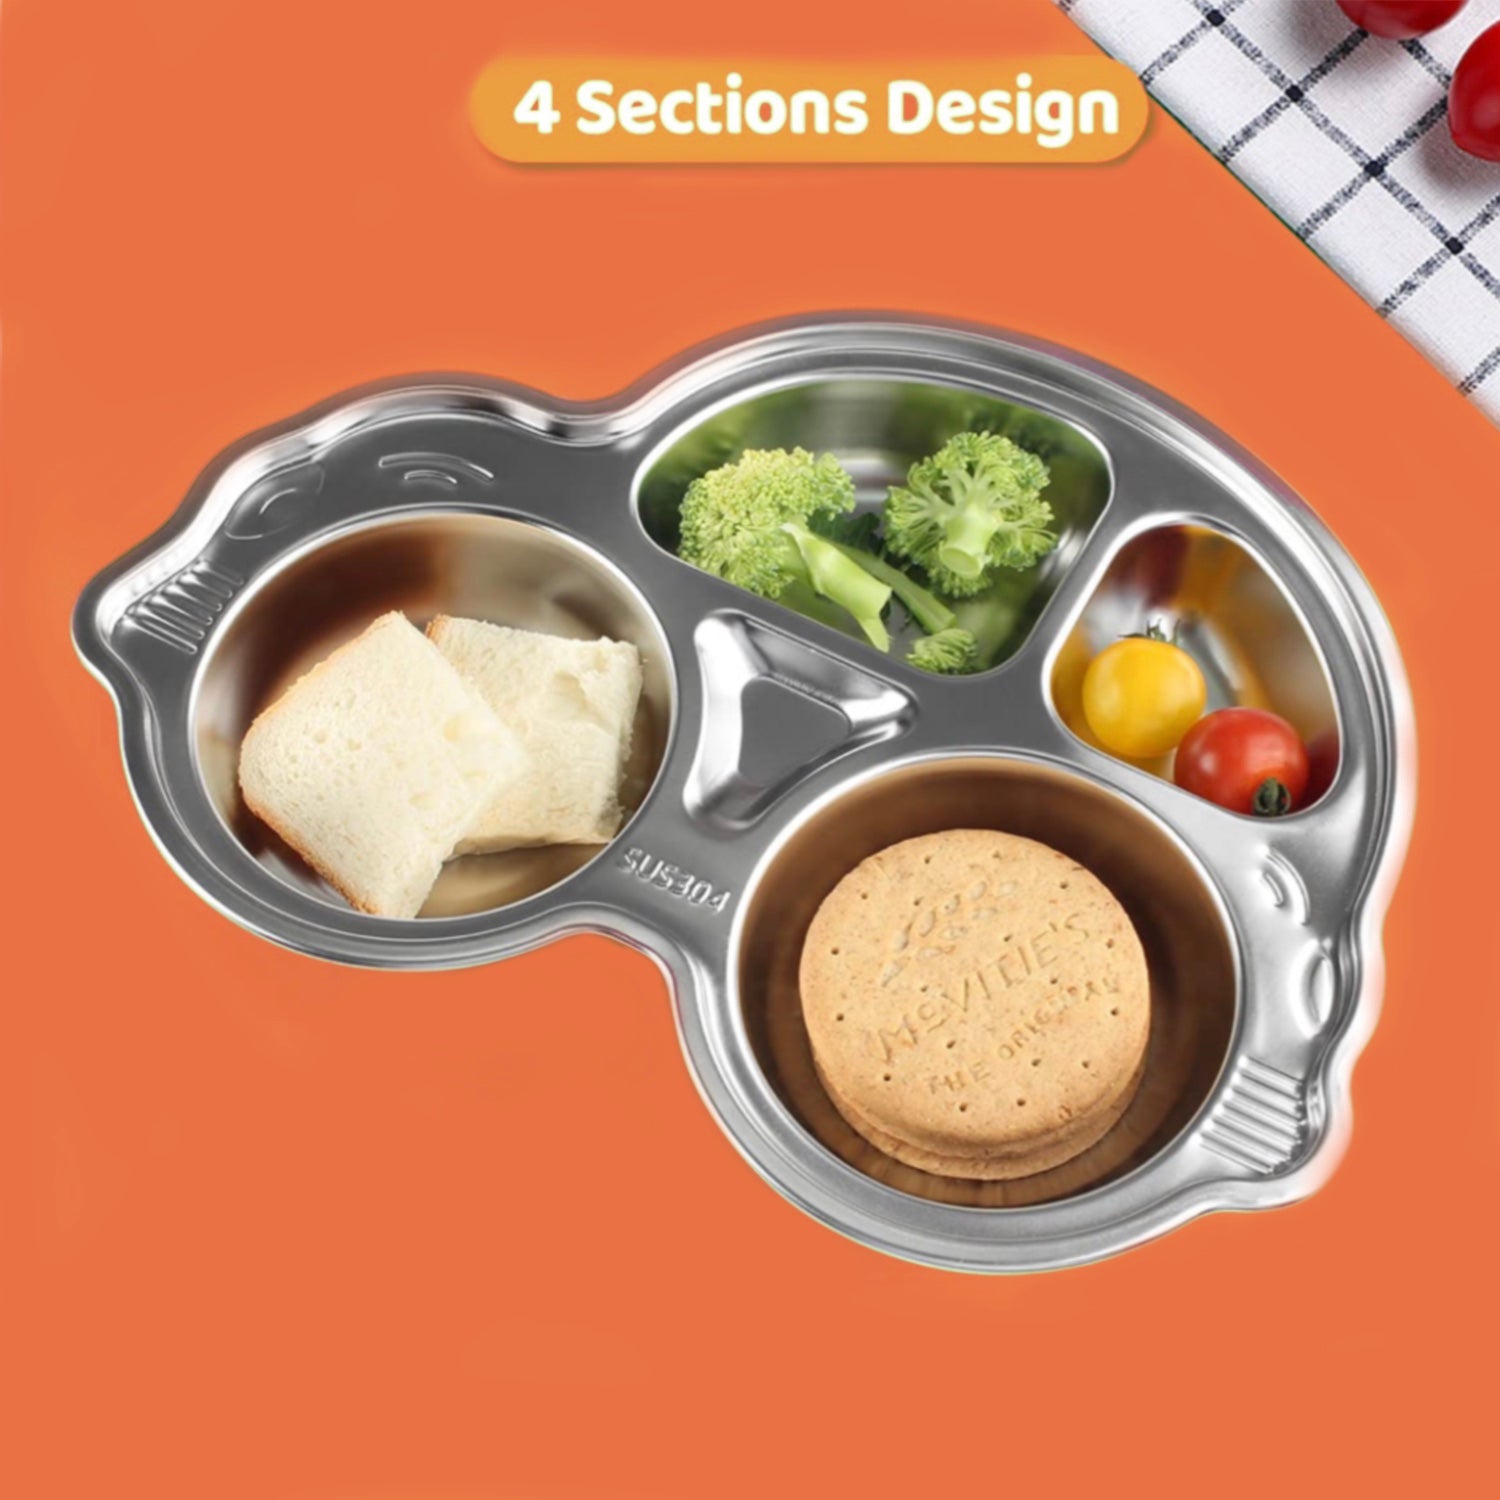 Theoni Stainless Steel Divided Meal  Plate Tray-4Compartments Dinner Dish for Baby- Toddler- Kids Feeding set - Car Shape- BPA-Free Safe Fun Non-Toxic Heavy Duty .